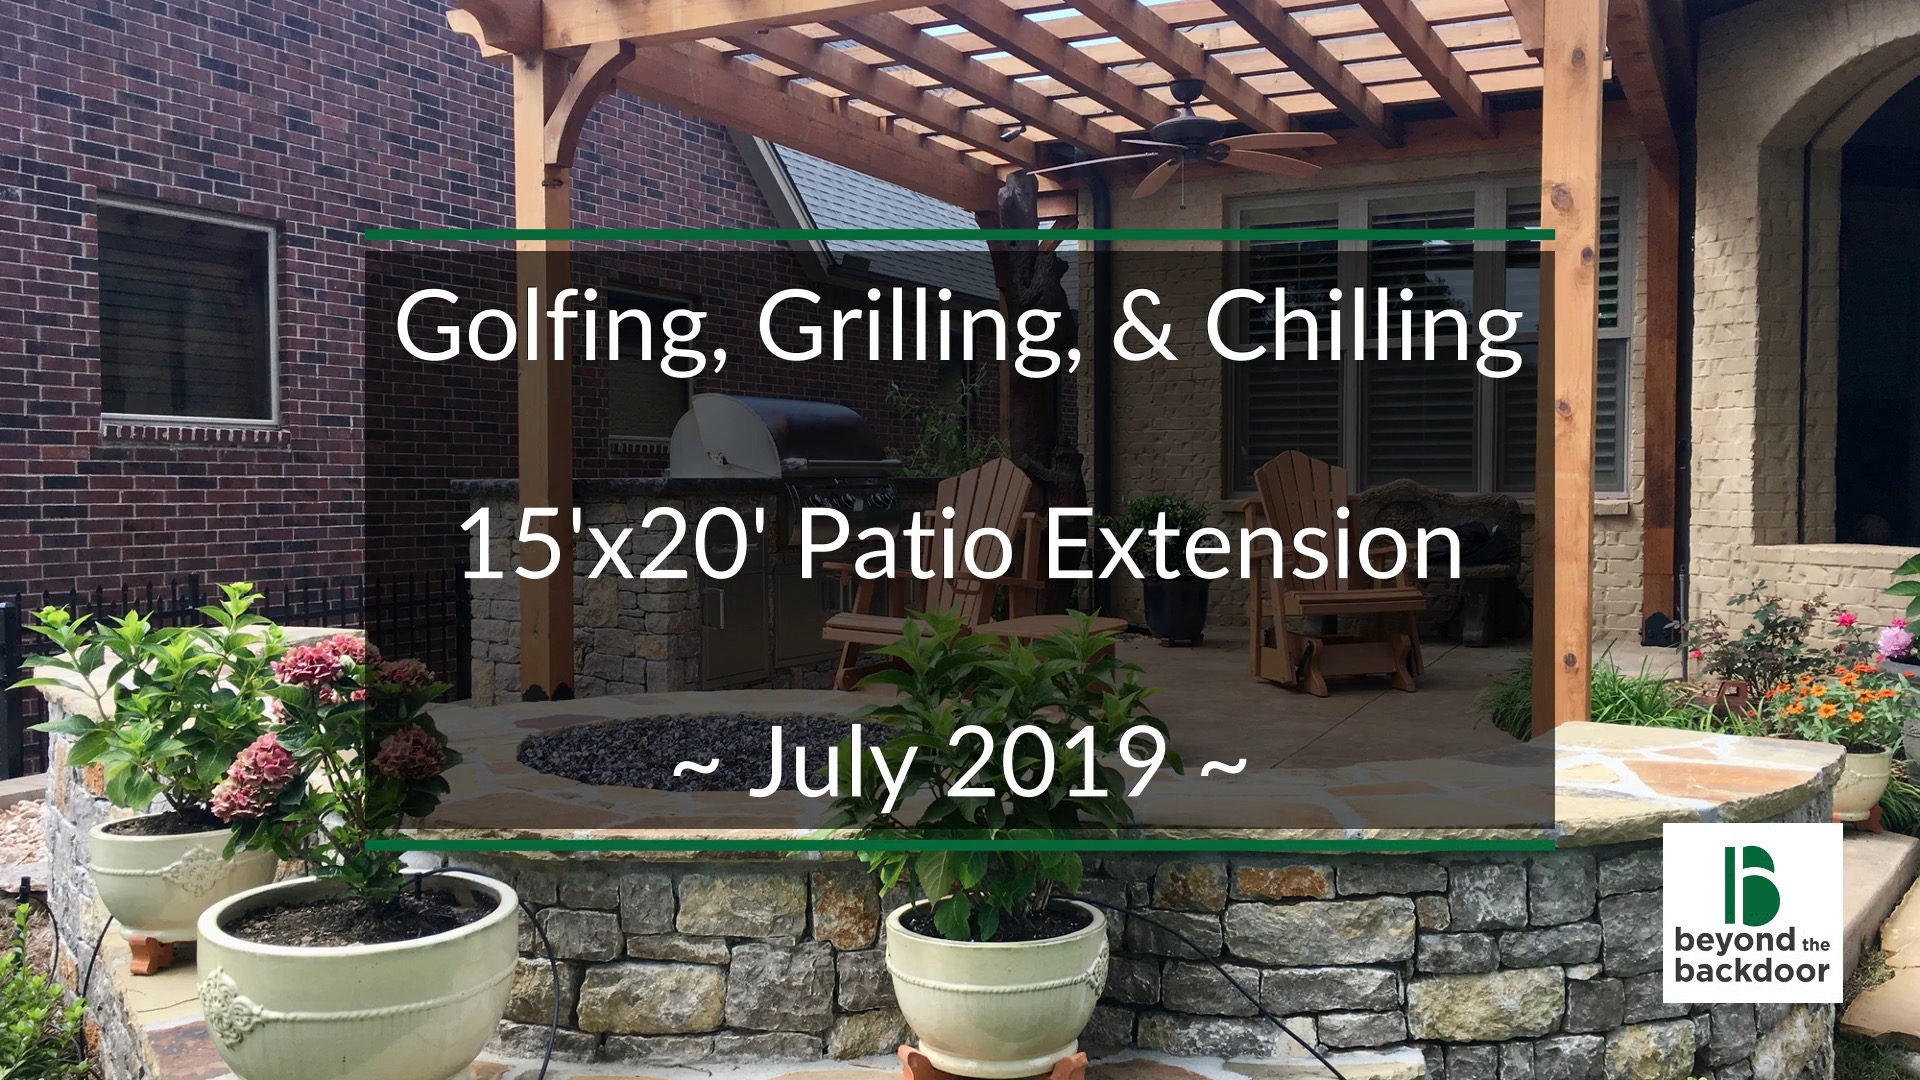 Golfing, Grilling, and Chilling on a New Custom Patio in Tulsa, Oklahoma – completed July 2019